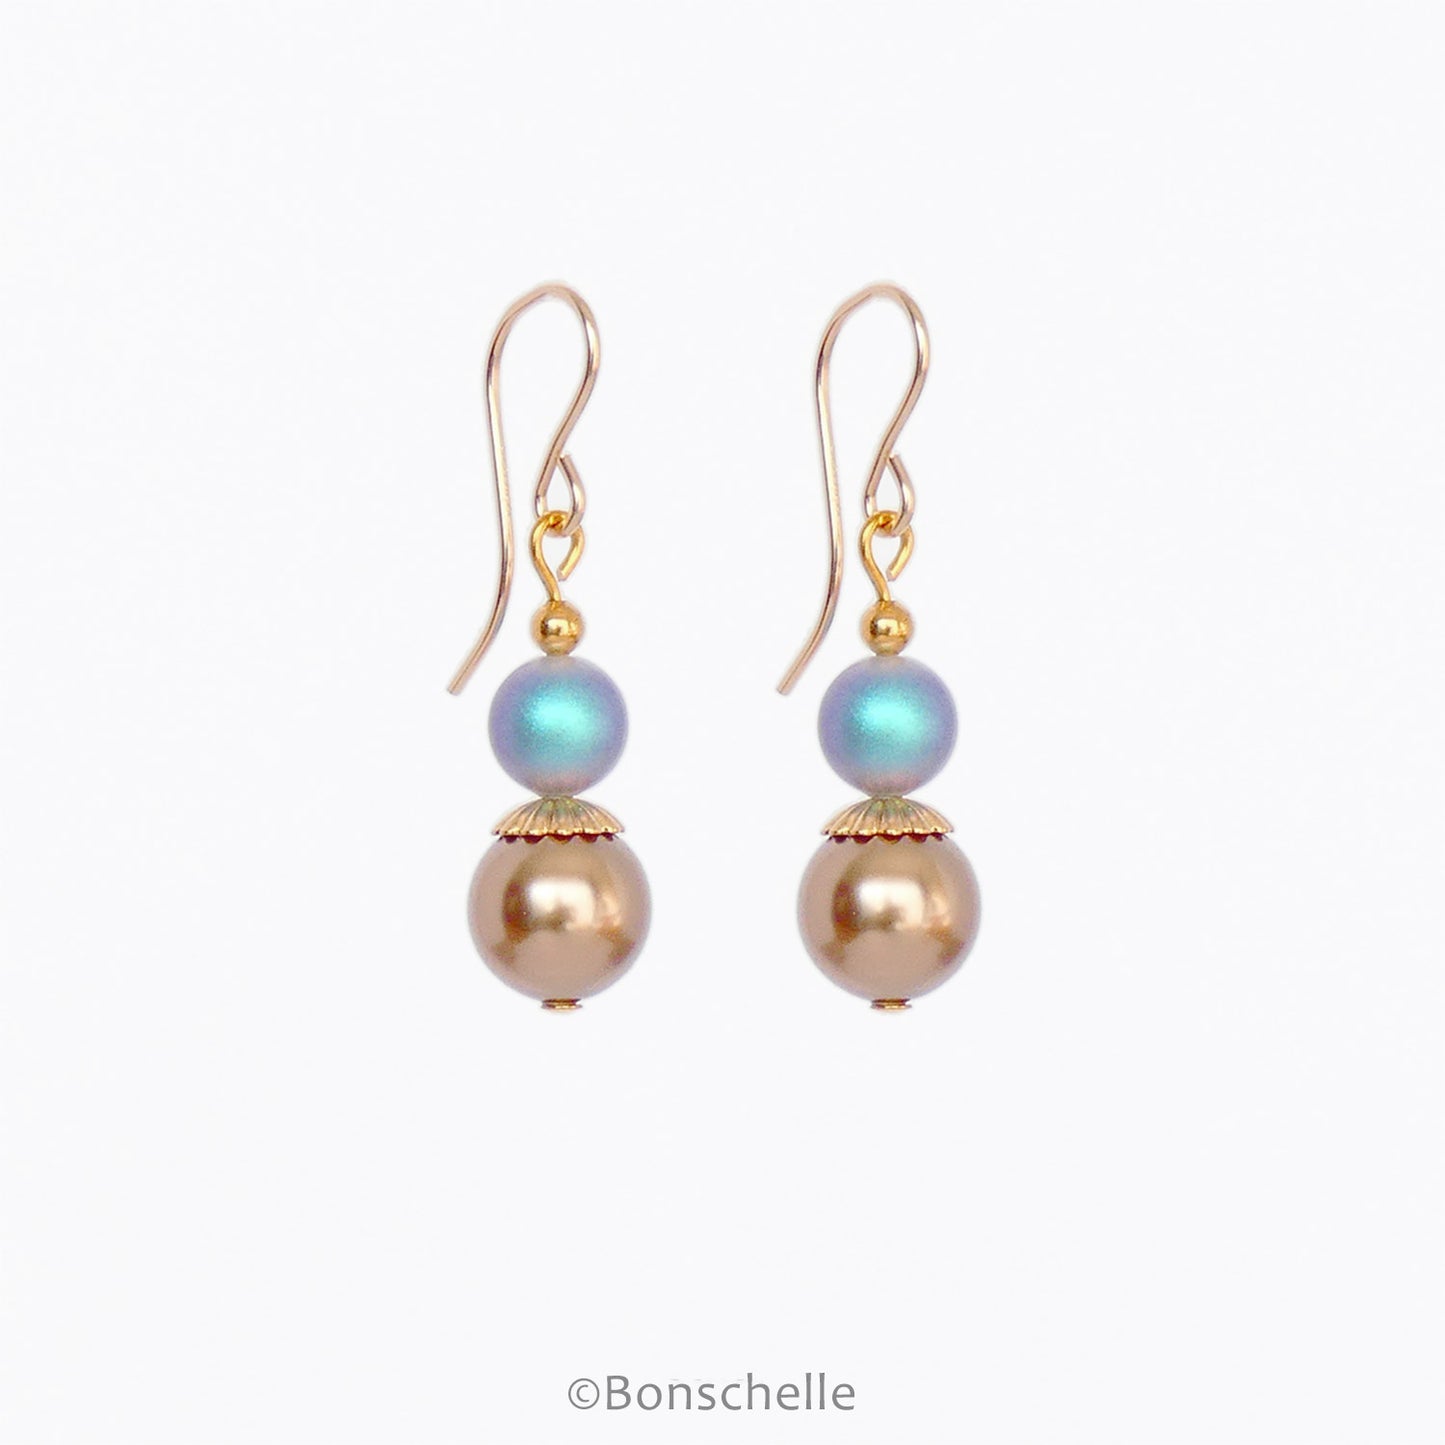 Sky blue irridescent and bronze toned pearl earrings for women with 14K gold filled earwires